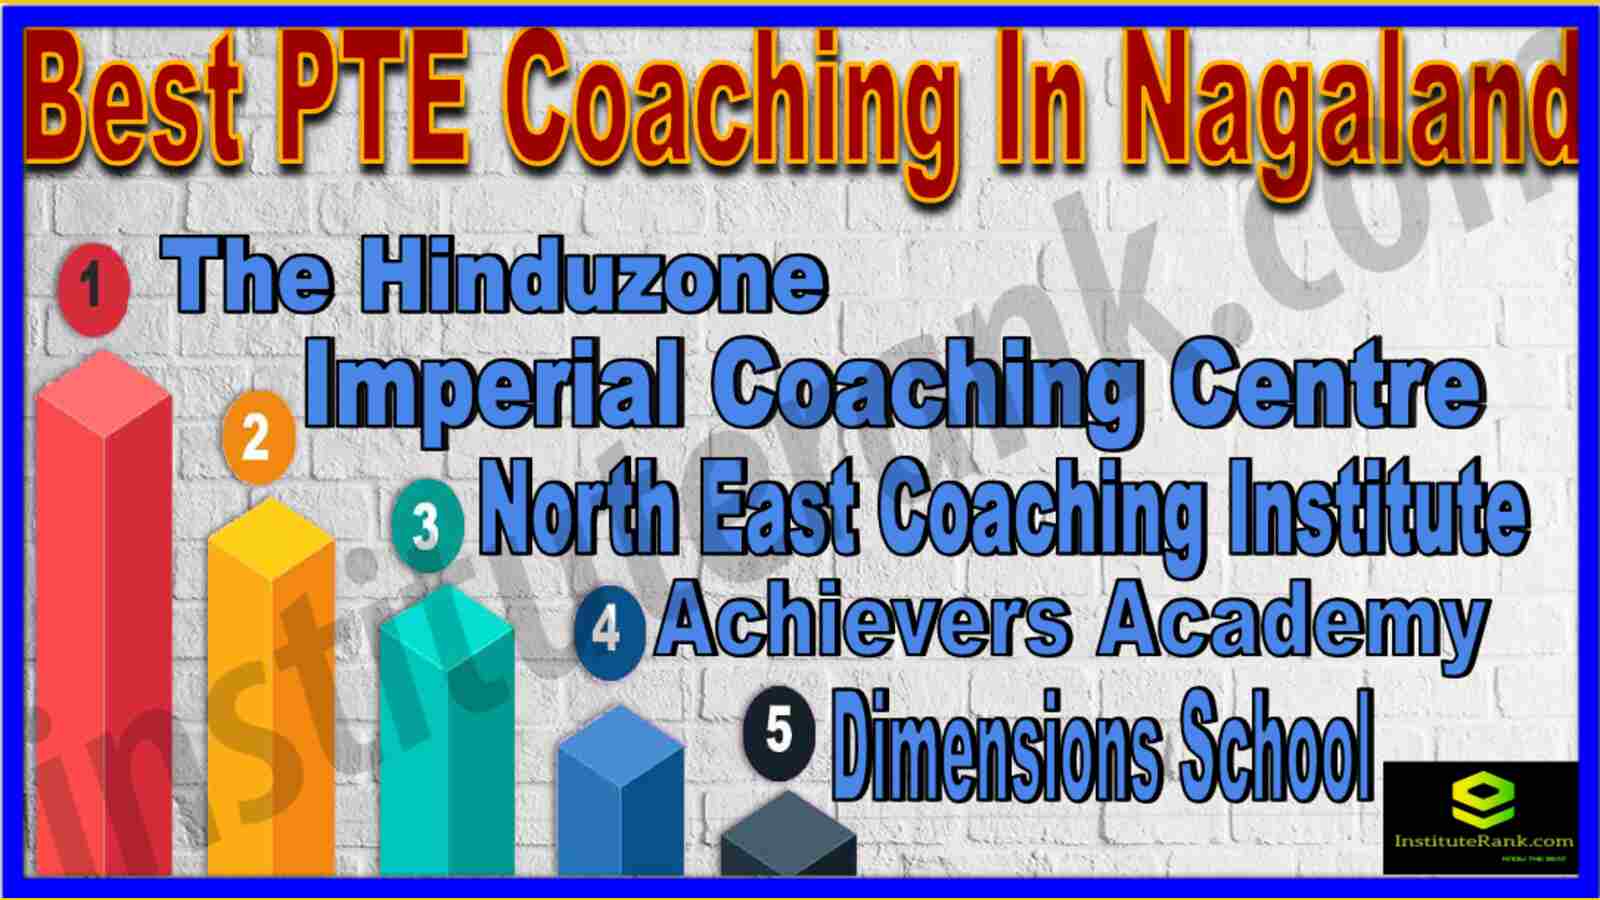 Best PTE Coaching In Nagaland